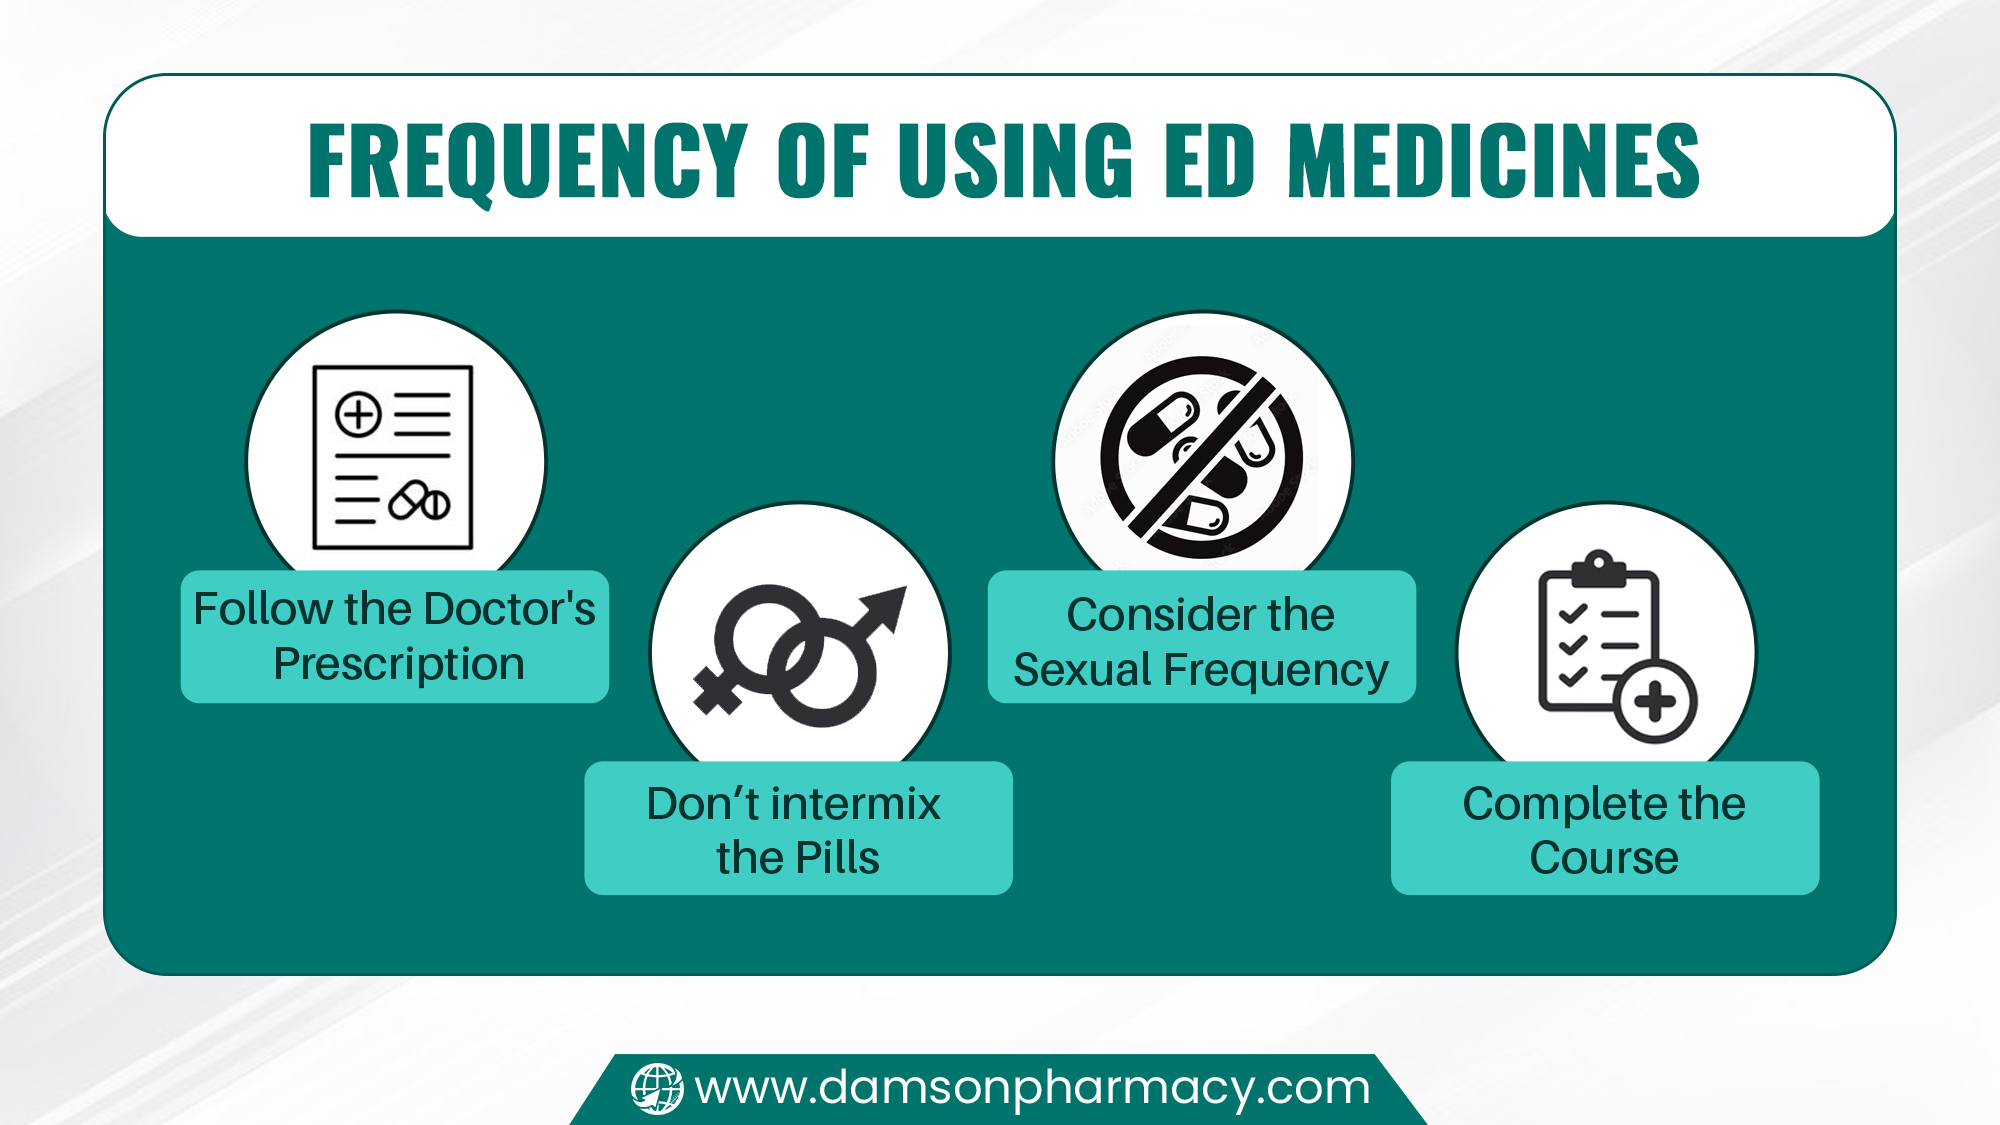 Frequency of Using ED Medicines